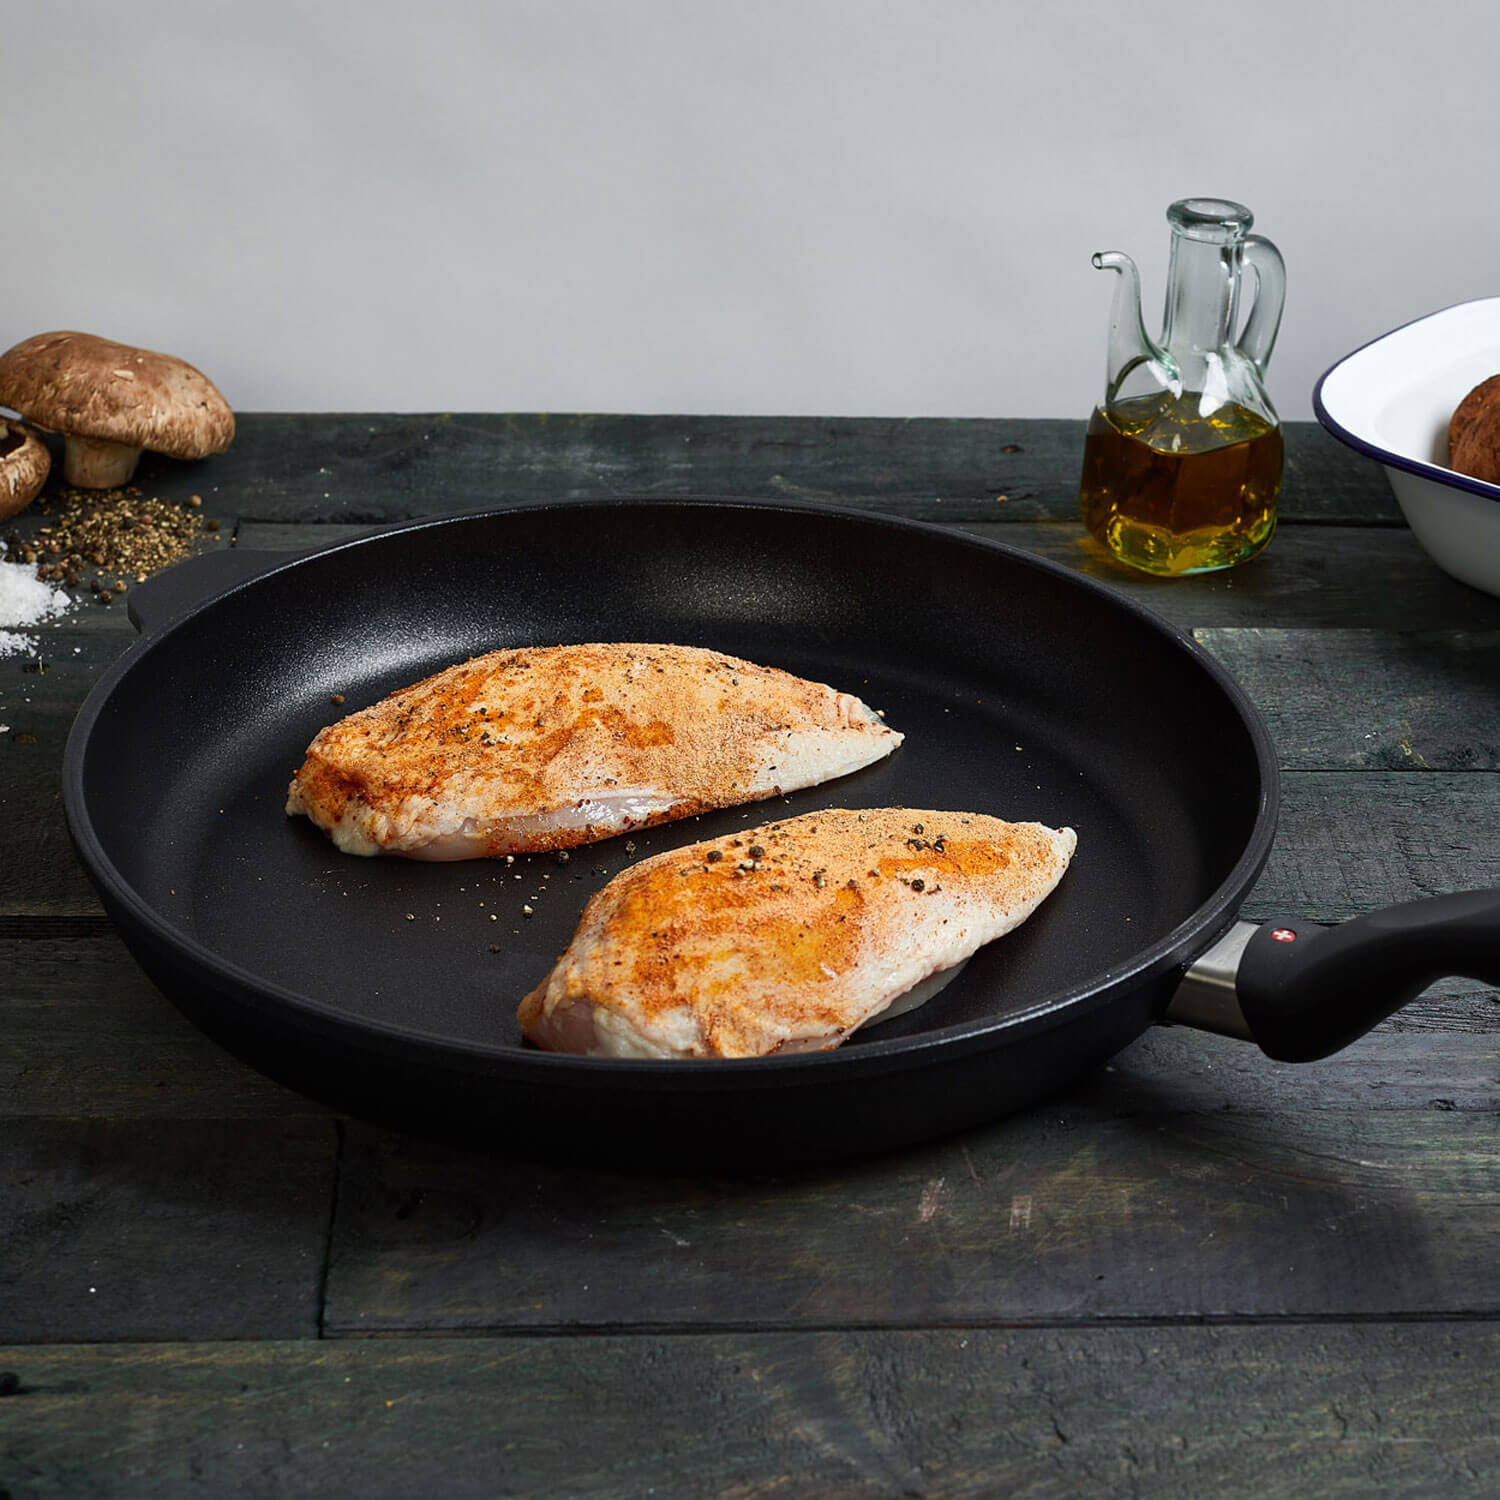 xd fry pan in use with cooked chicken breast on a wooden table